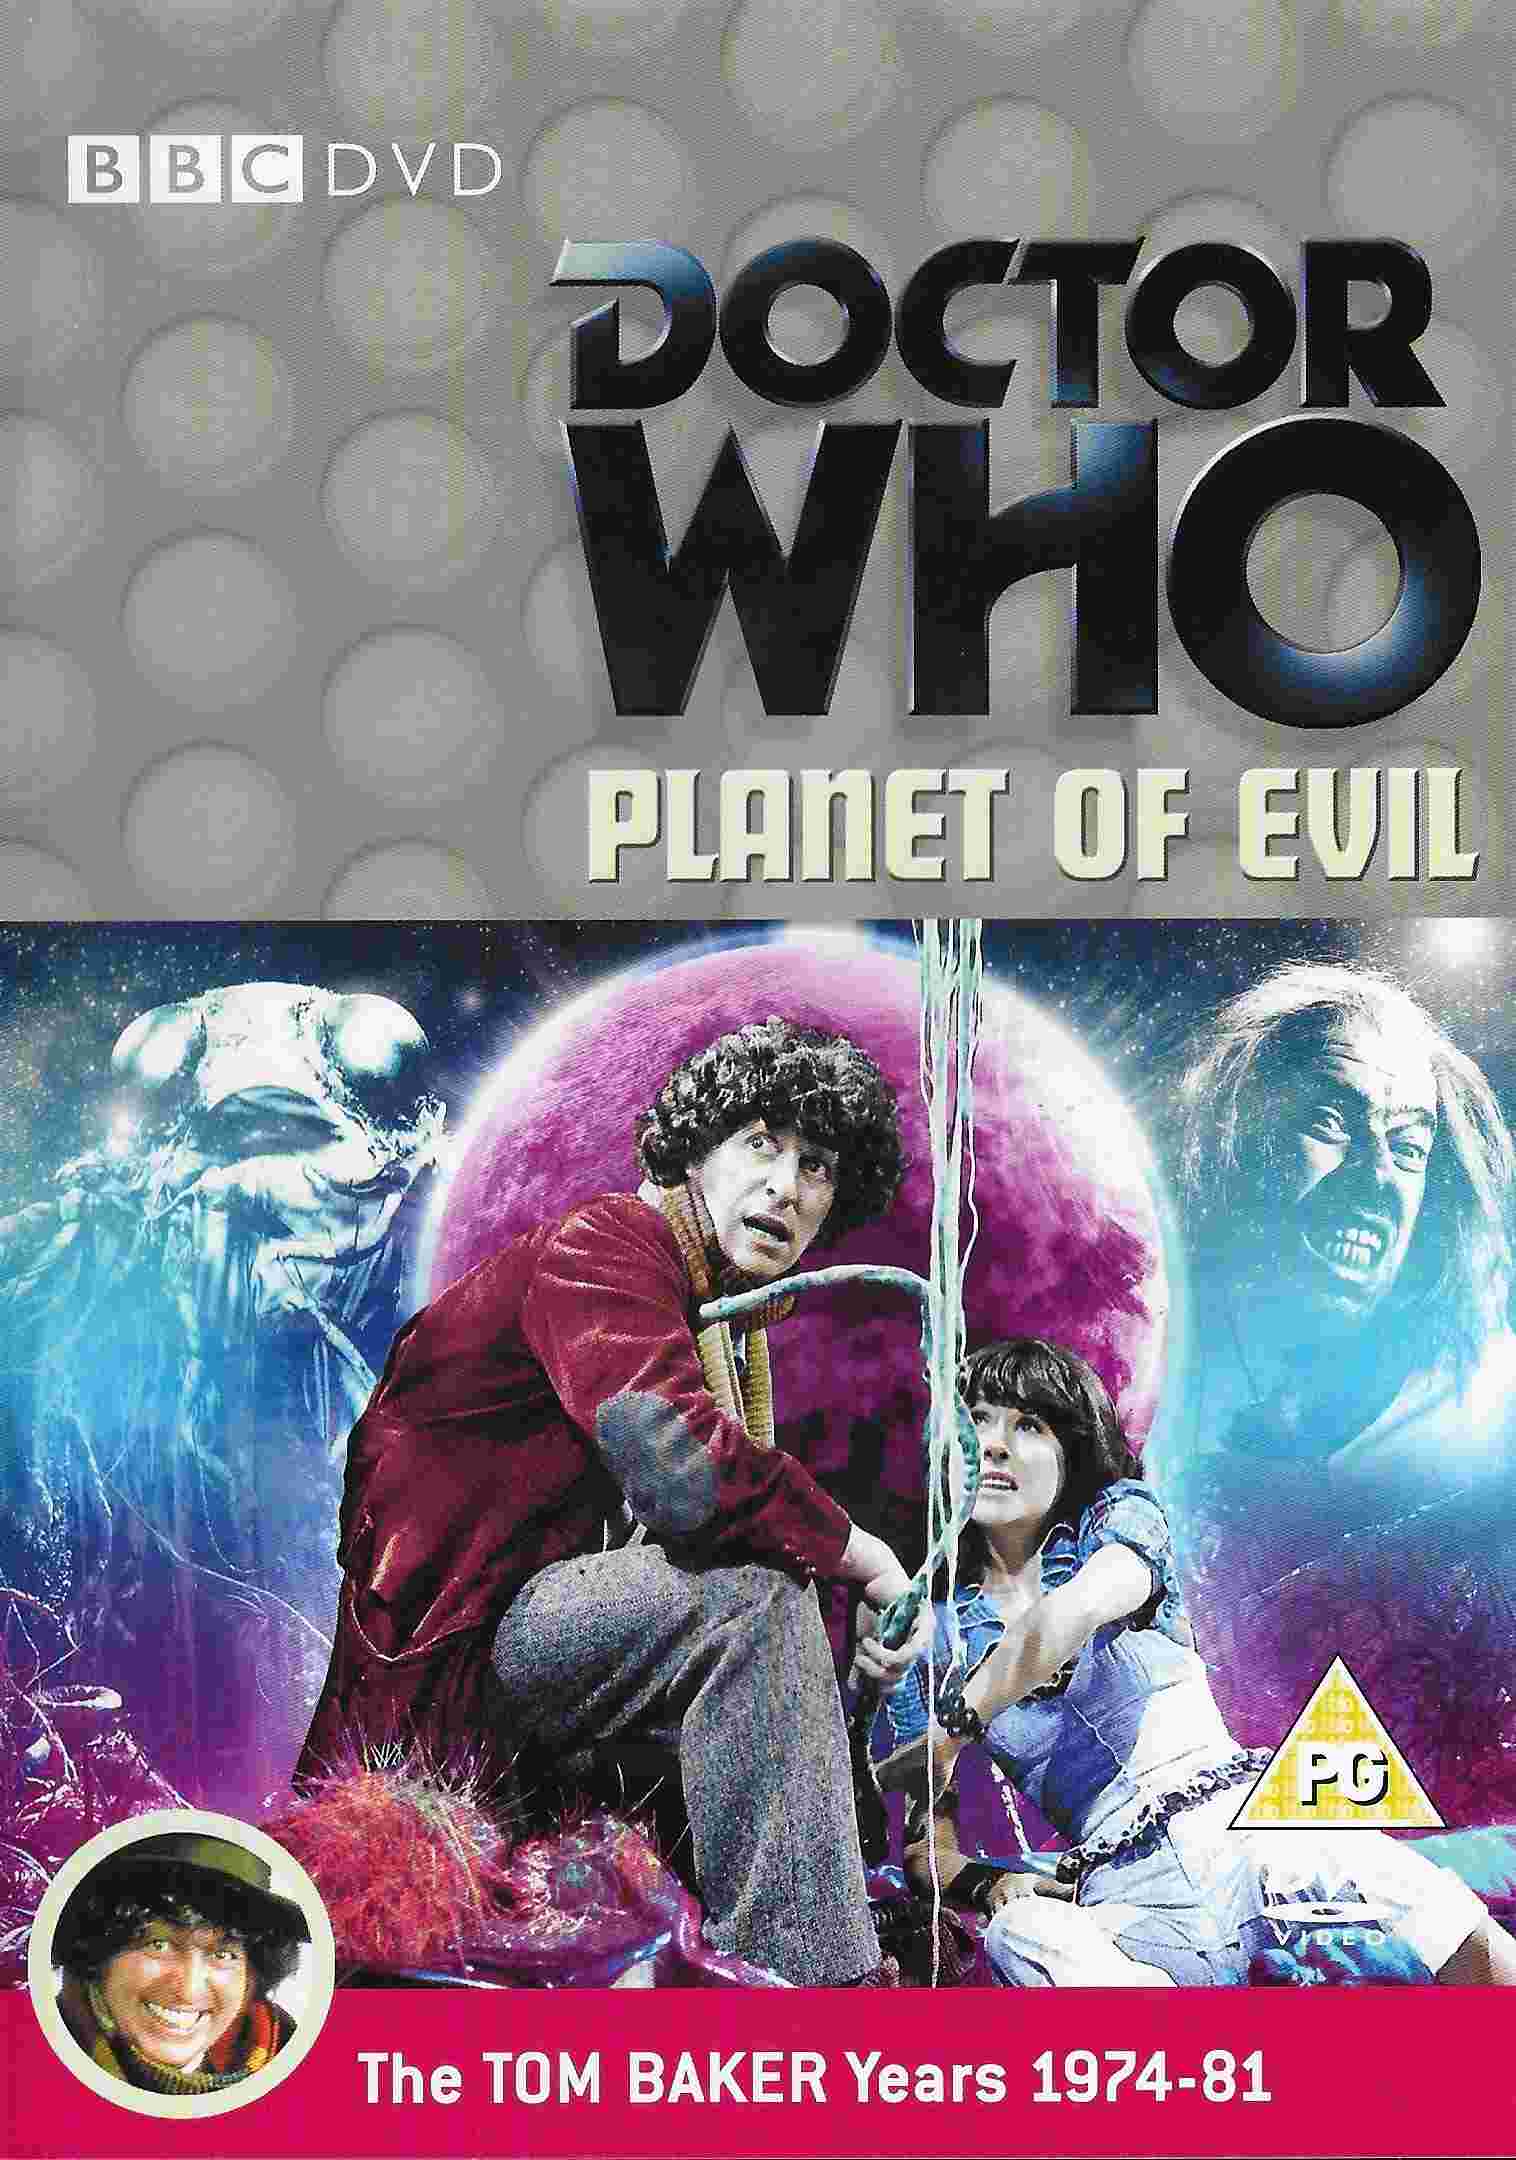 Picture of BBCDVD 1814 Doctor Who - Planet of evil by artist Louis Marks from the BBC records and Tapes library